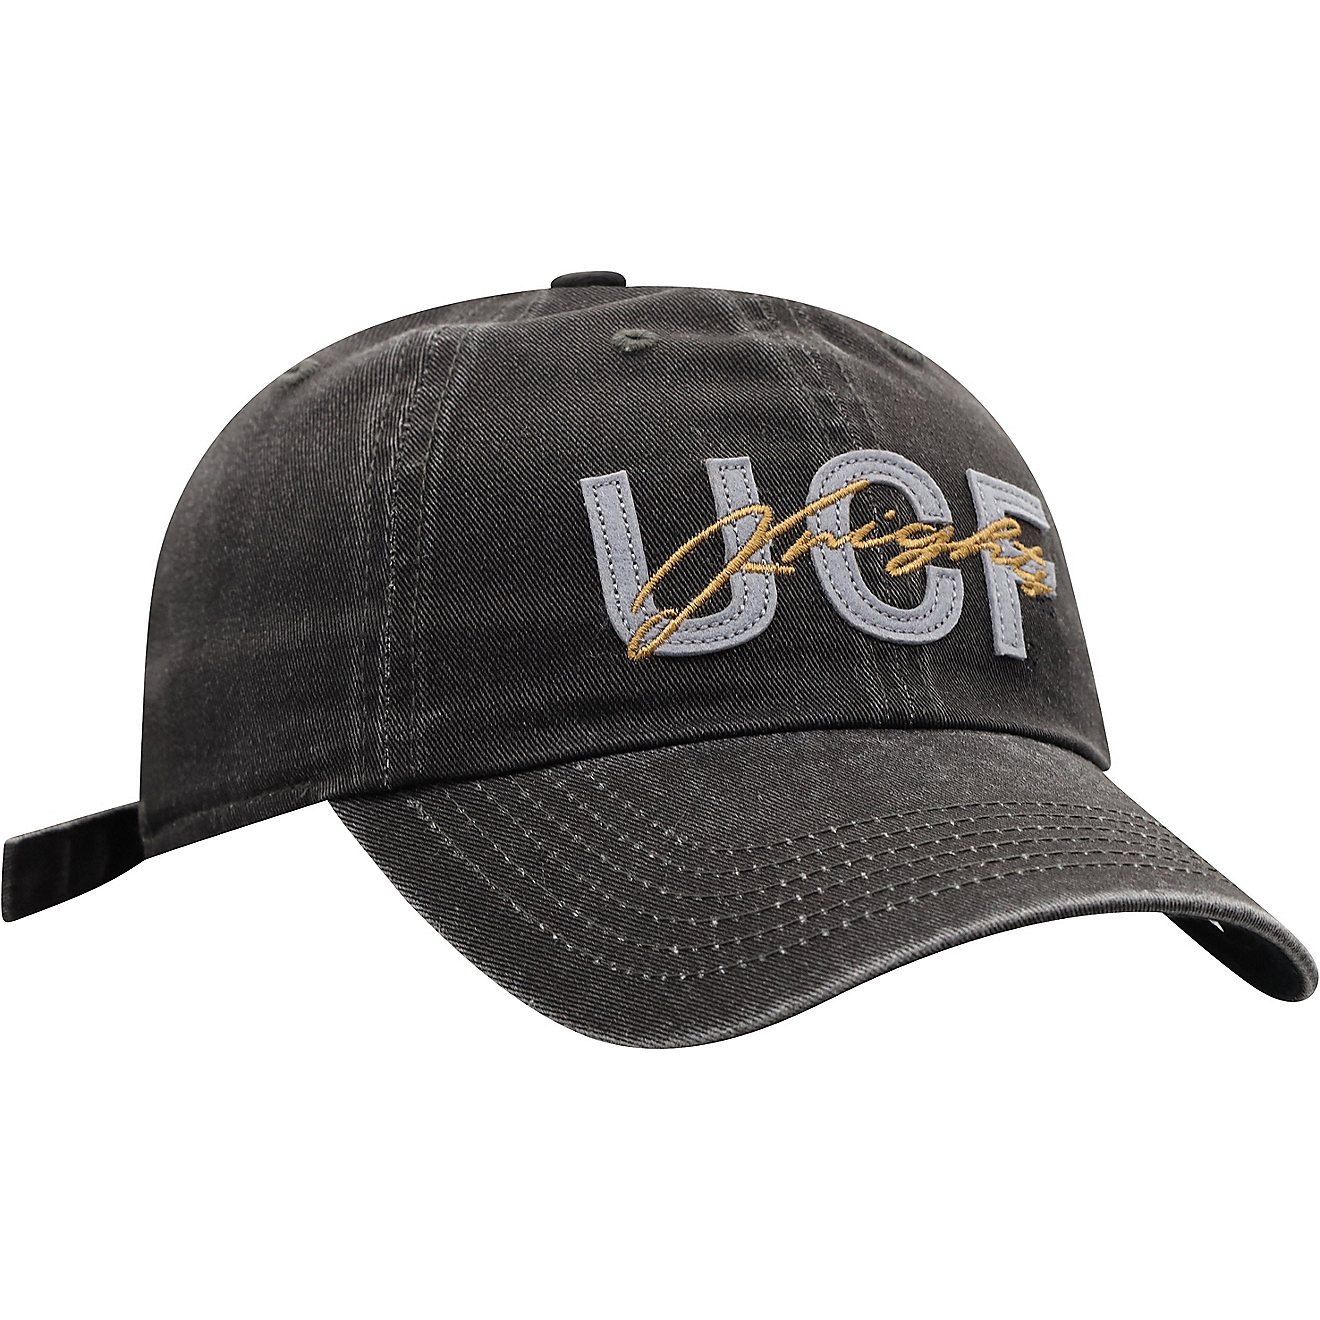 Top of the World Women's University of Central Florida Sola Adjustable Cap                                                       - view number 1